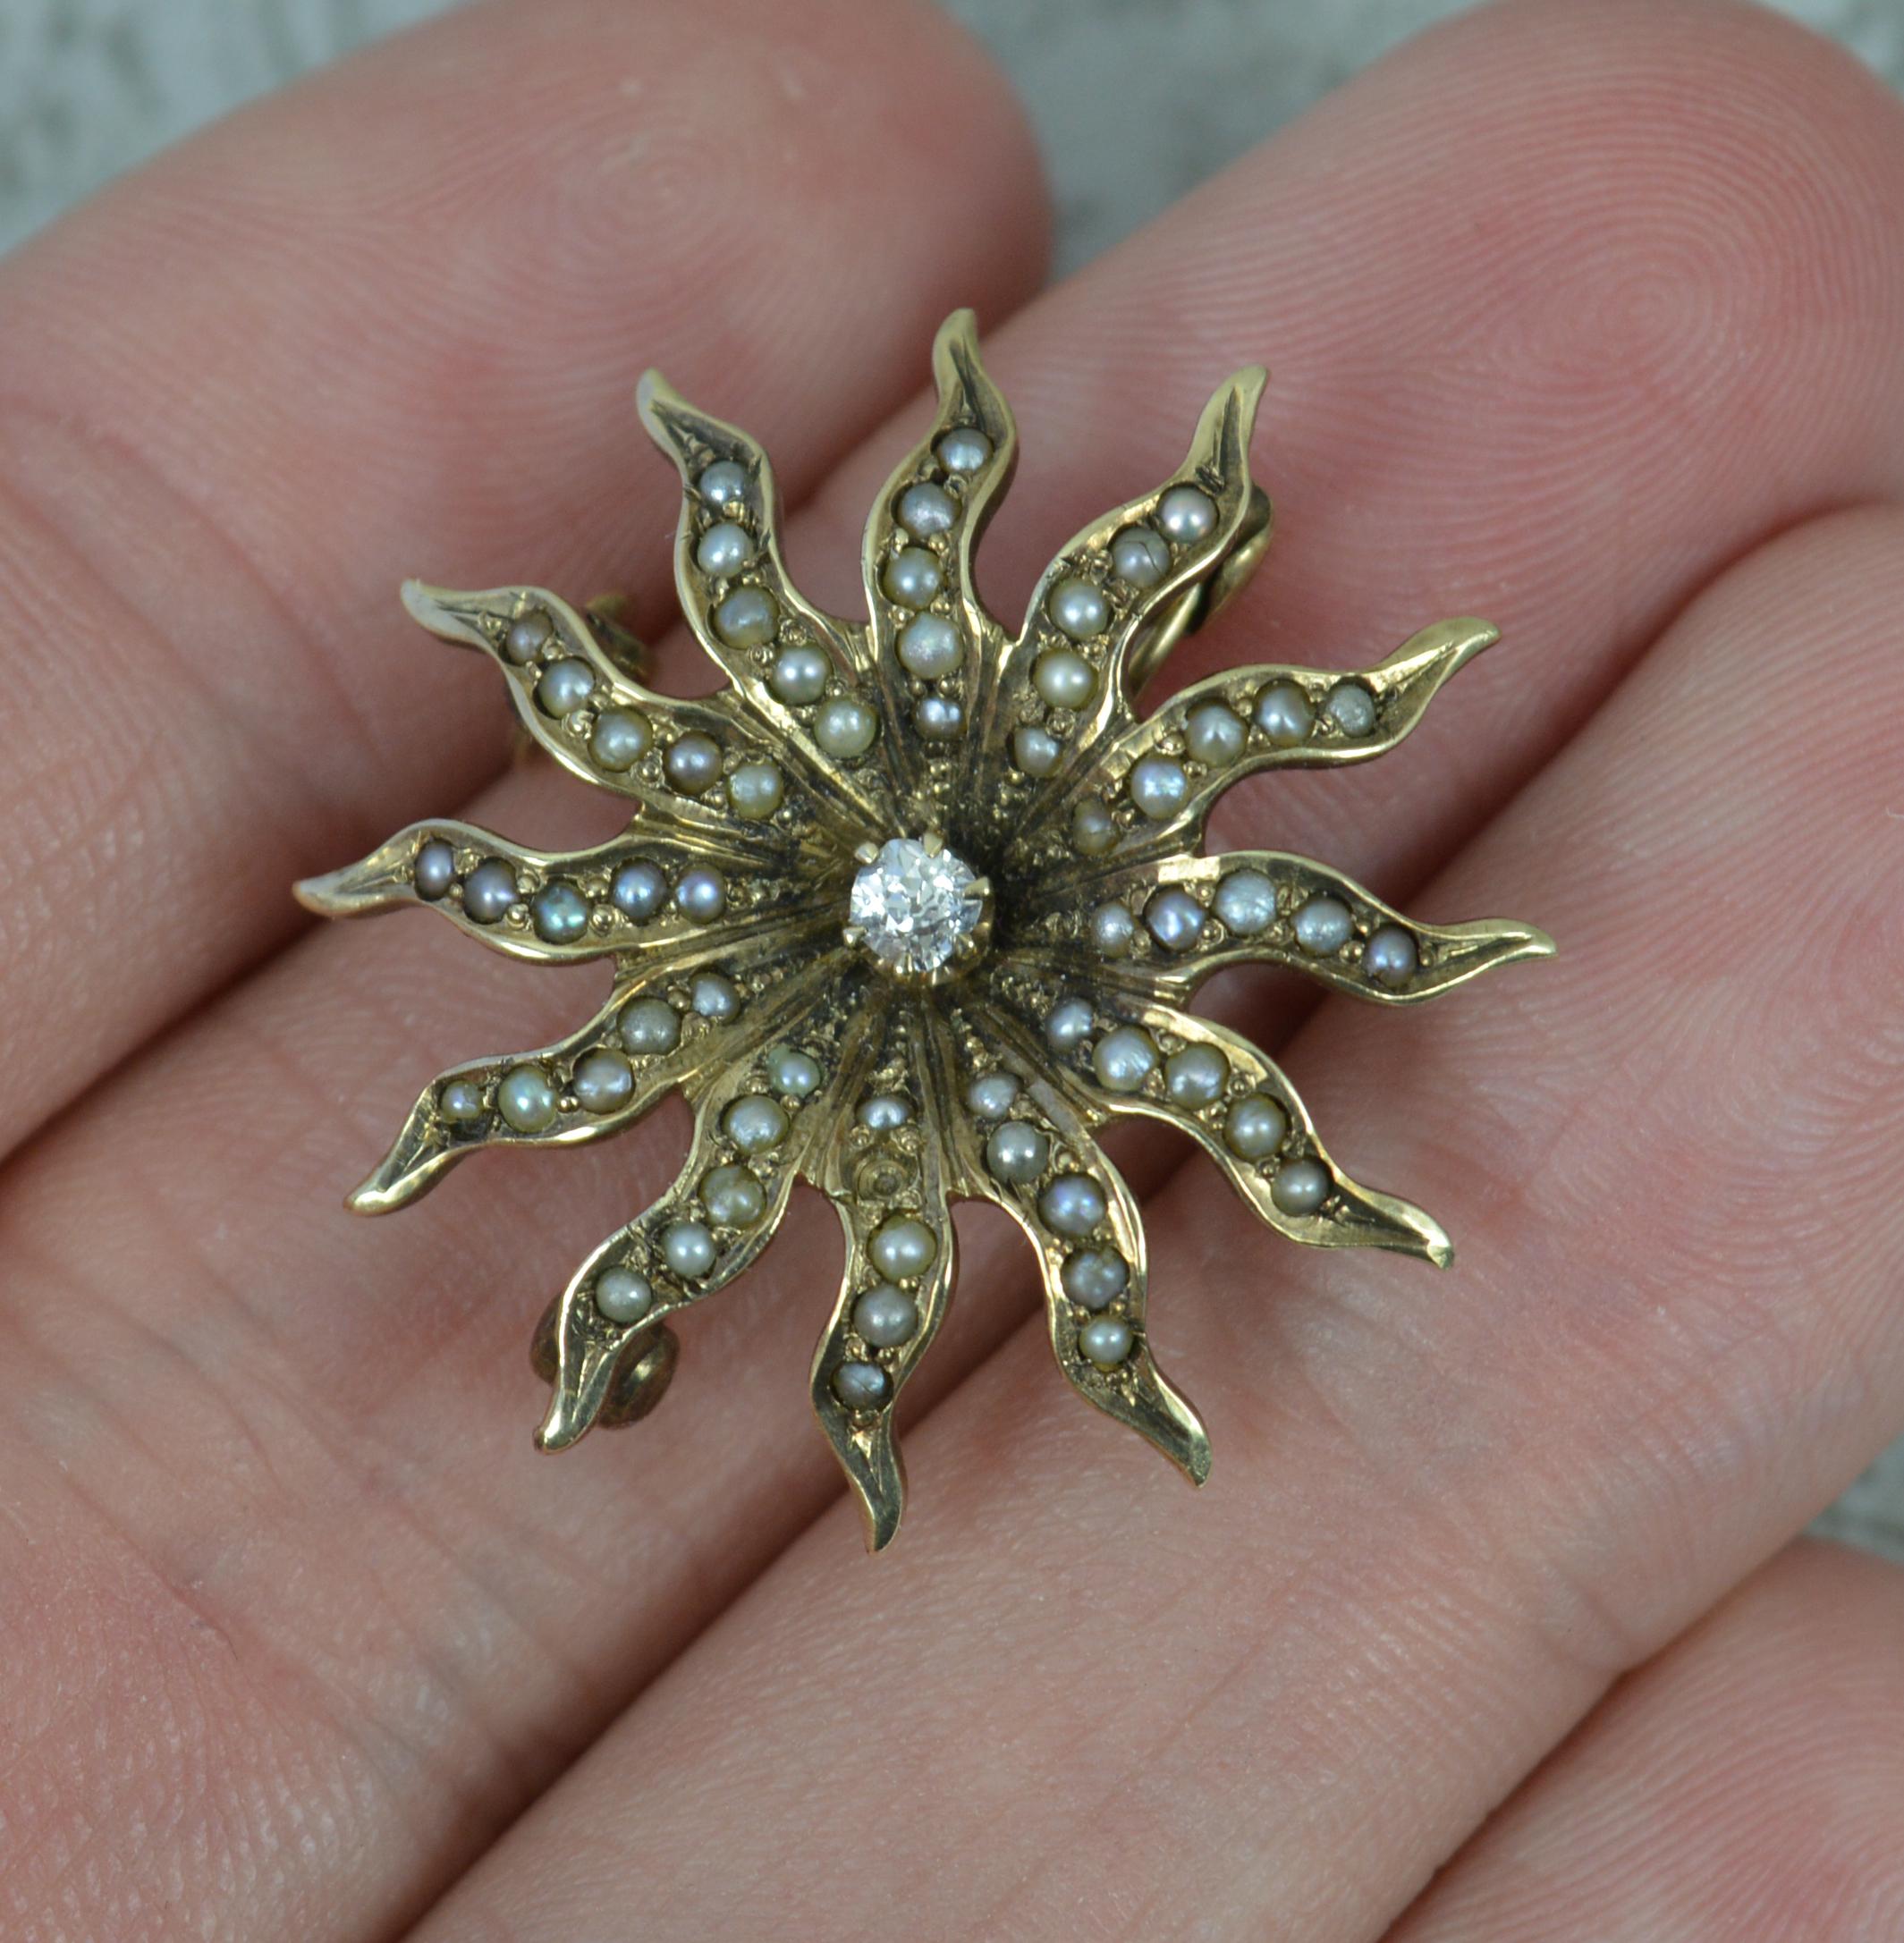 A fantastic brooch.
Solid 9 carat gold example.
Designed as a twelve pointed star or sun.
Set with an old cut diamond to the centre and seed pearls surrounding.

CONDITION ; Very good. Crisp gold section, issue free. Clean stones, well set. Light